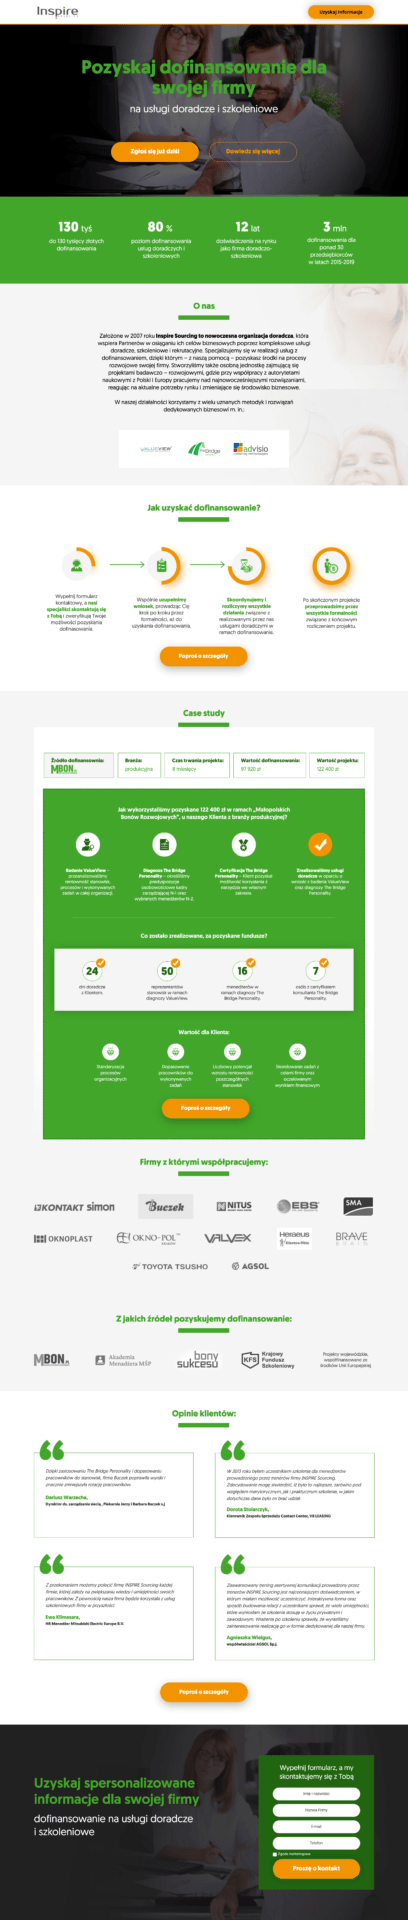 INSPIRE landing page